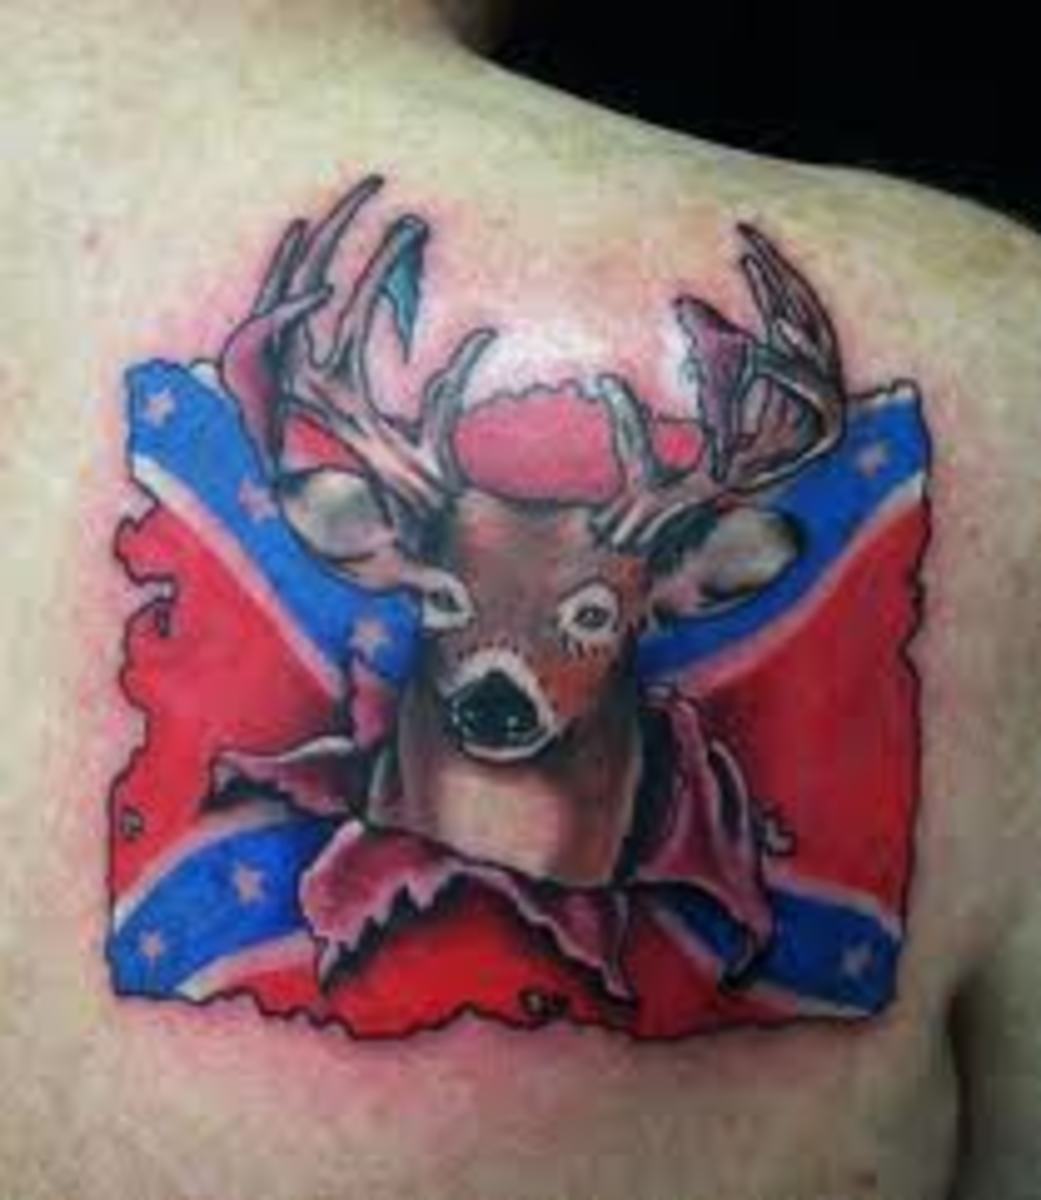 confederate-flag-tattoos-and-meanings